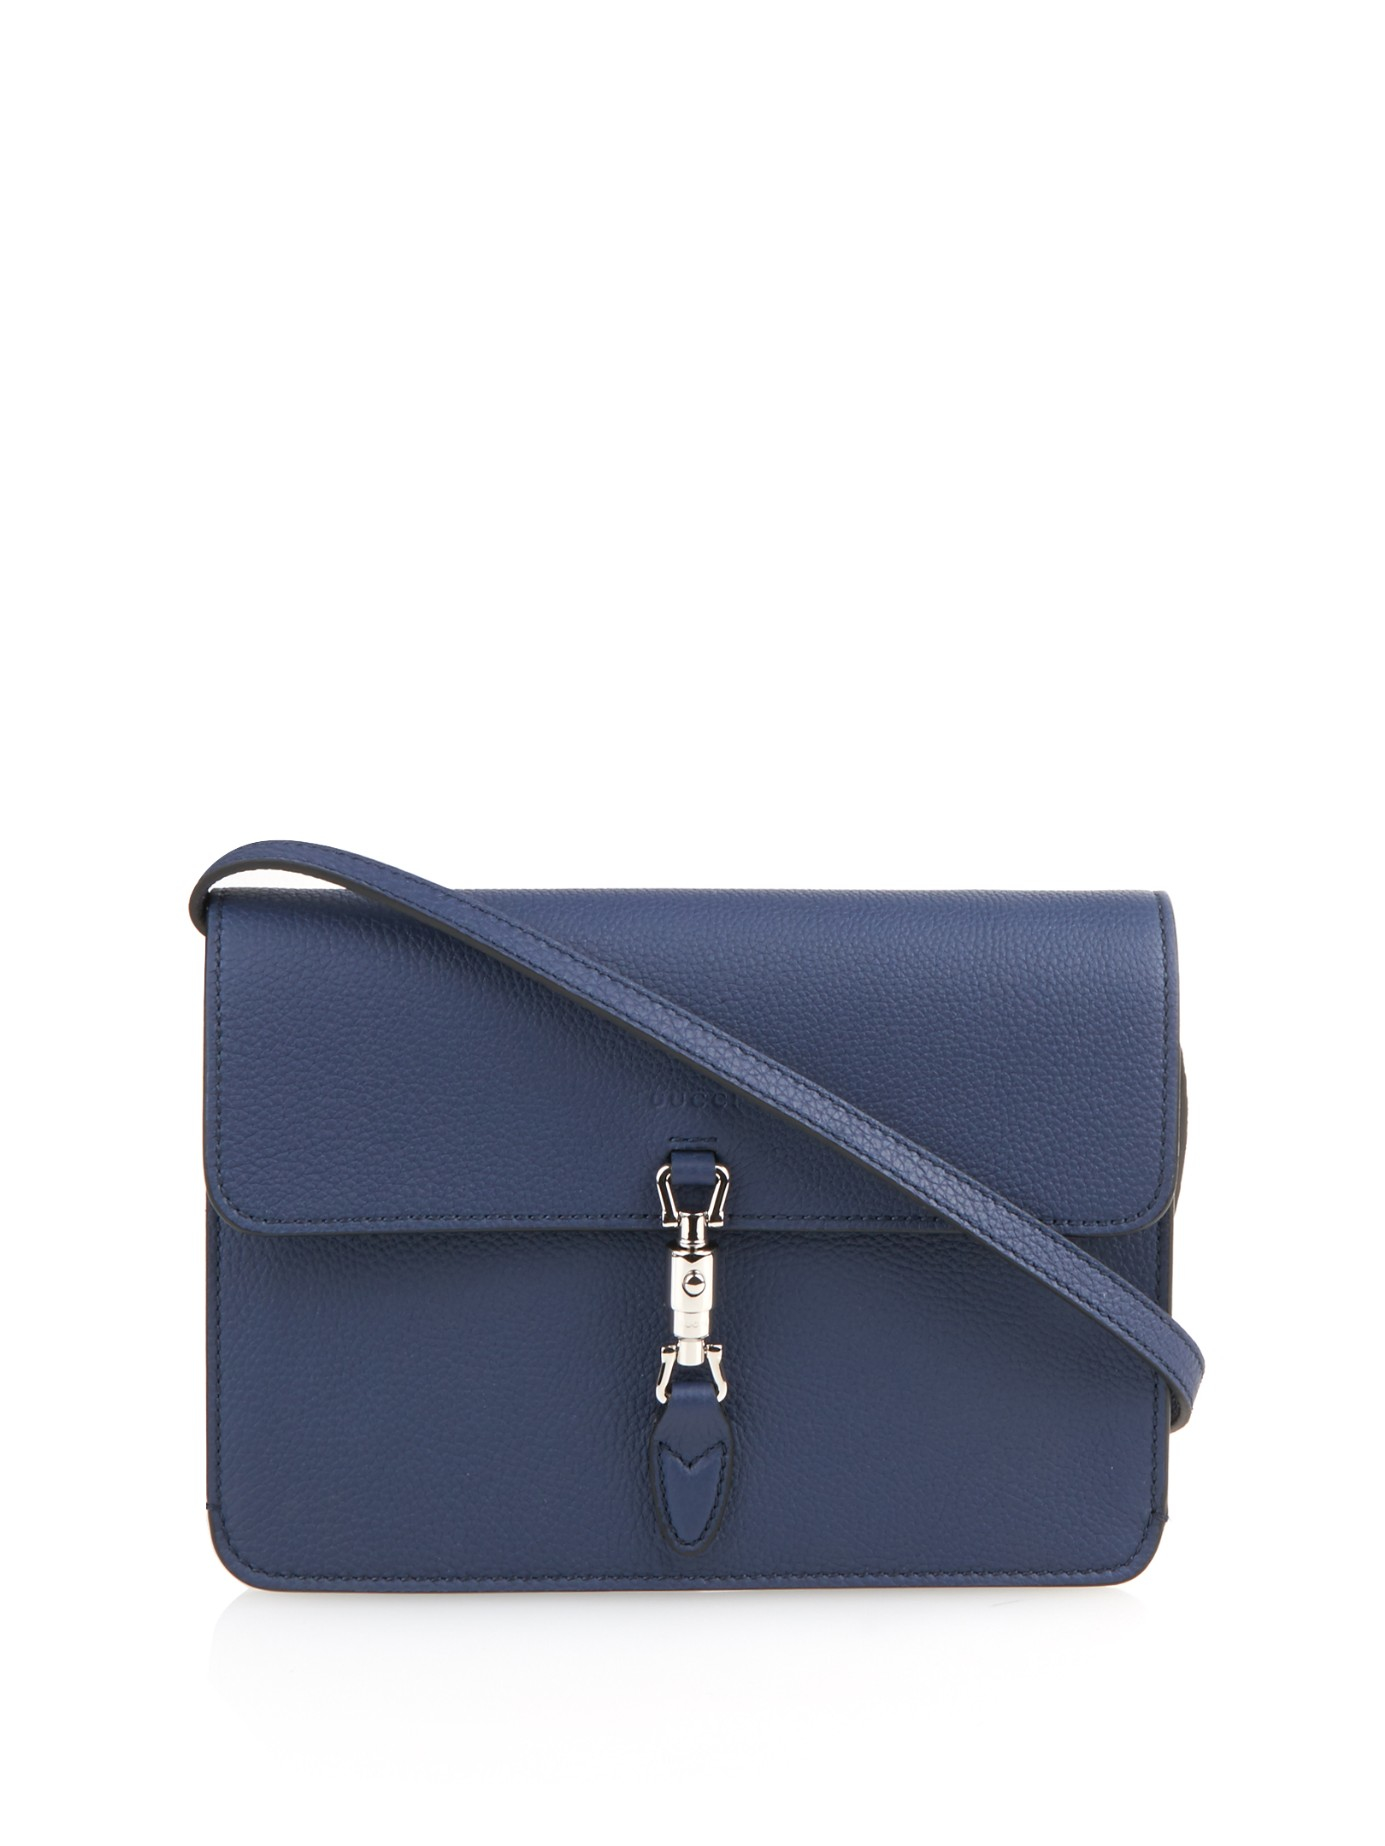 Lyst - Gucci Jackie Leather Shoulder-Strap Purse in Blue